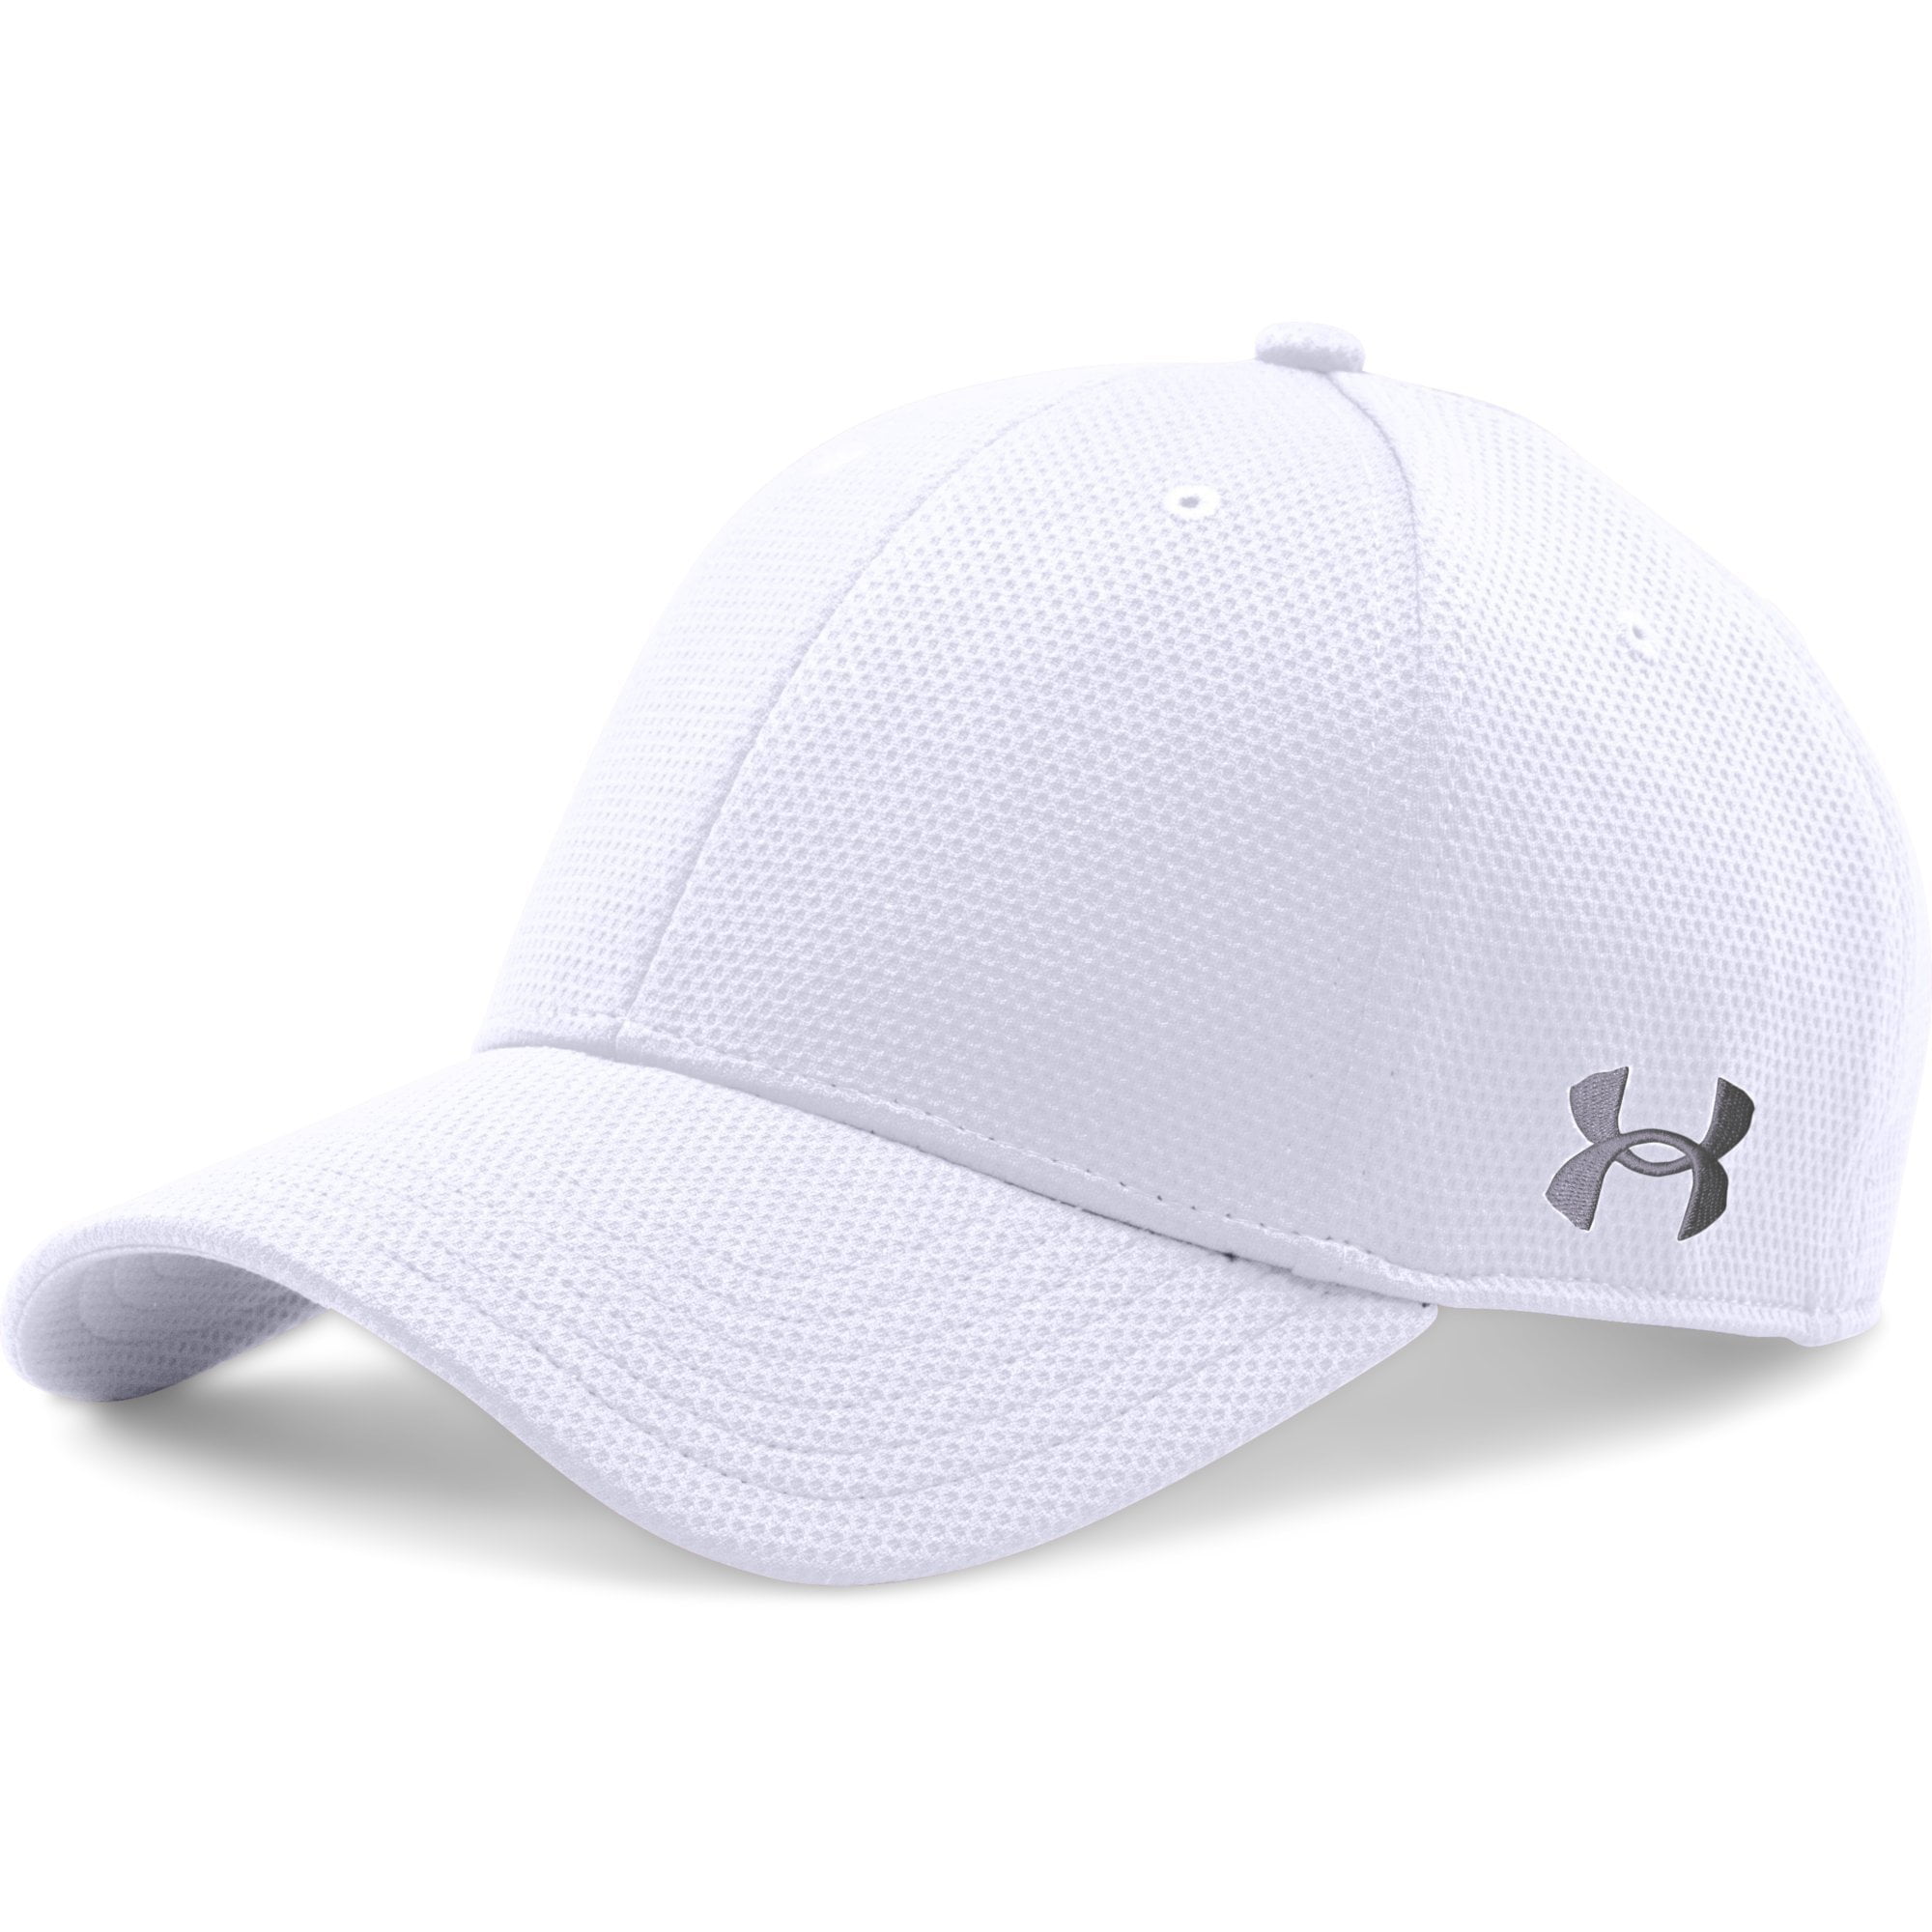 Under Armour Men's Curved Brim Stretch Fit Hat, White, MD/LG Cap 